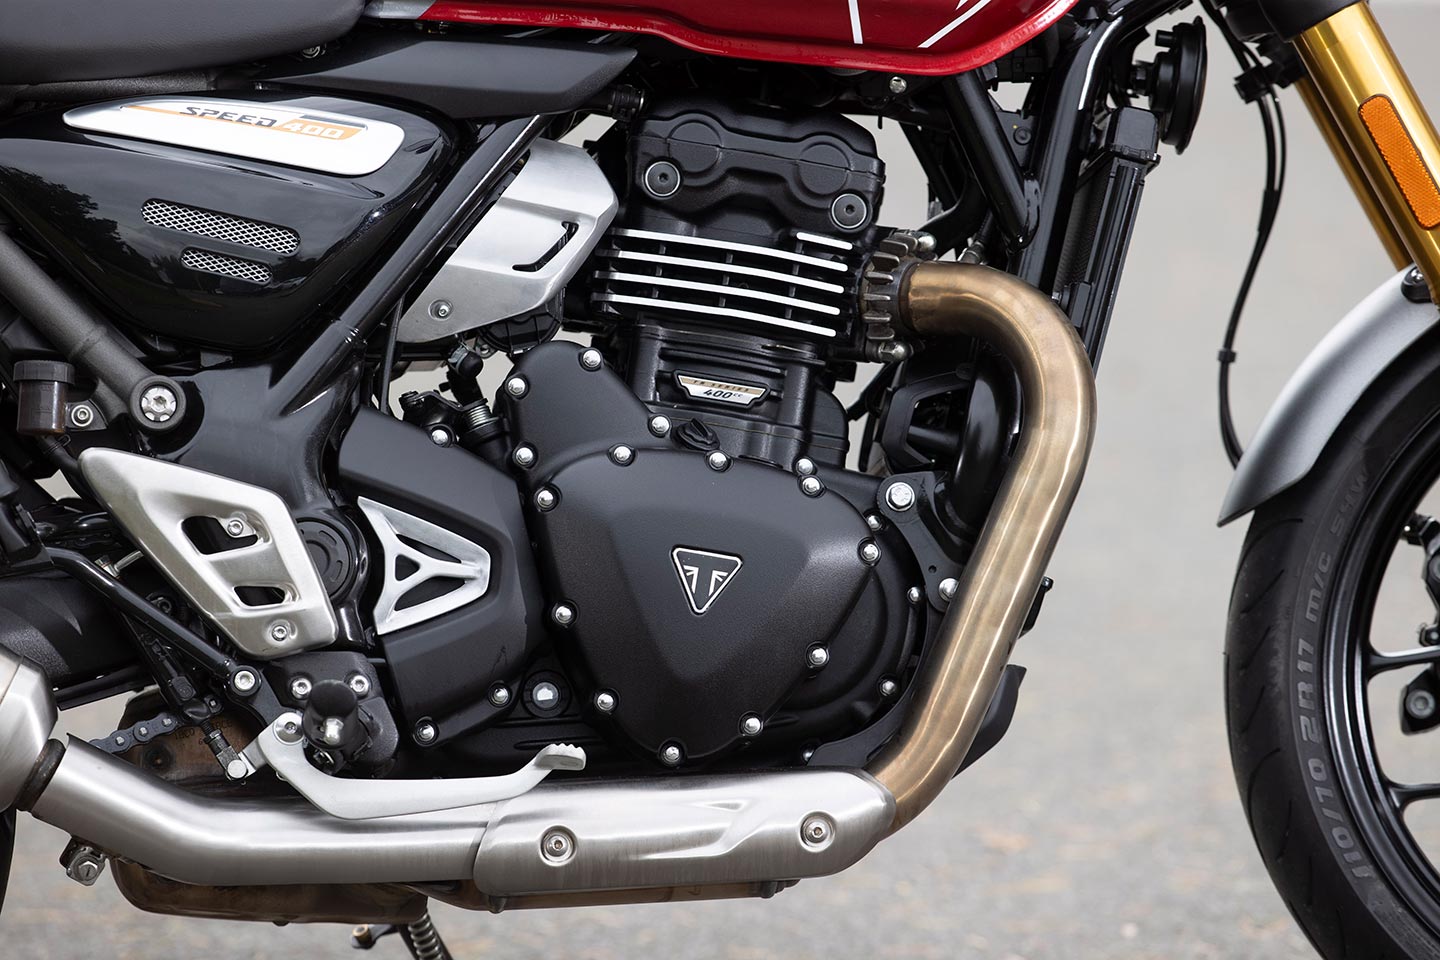 Triumph claims 39.5 hp from the Speed 400’s 398cc DOHC liquid-cooled single.